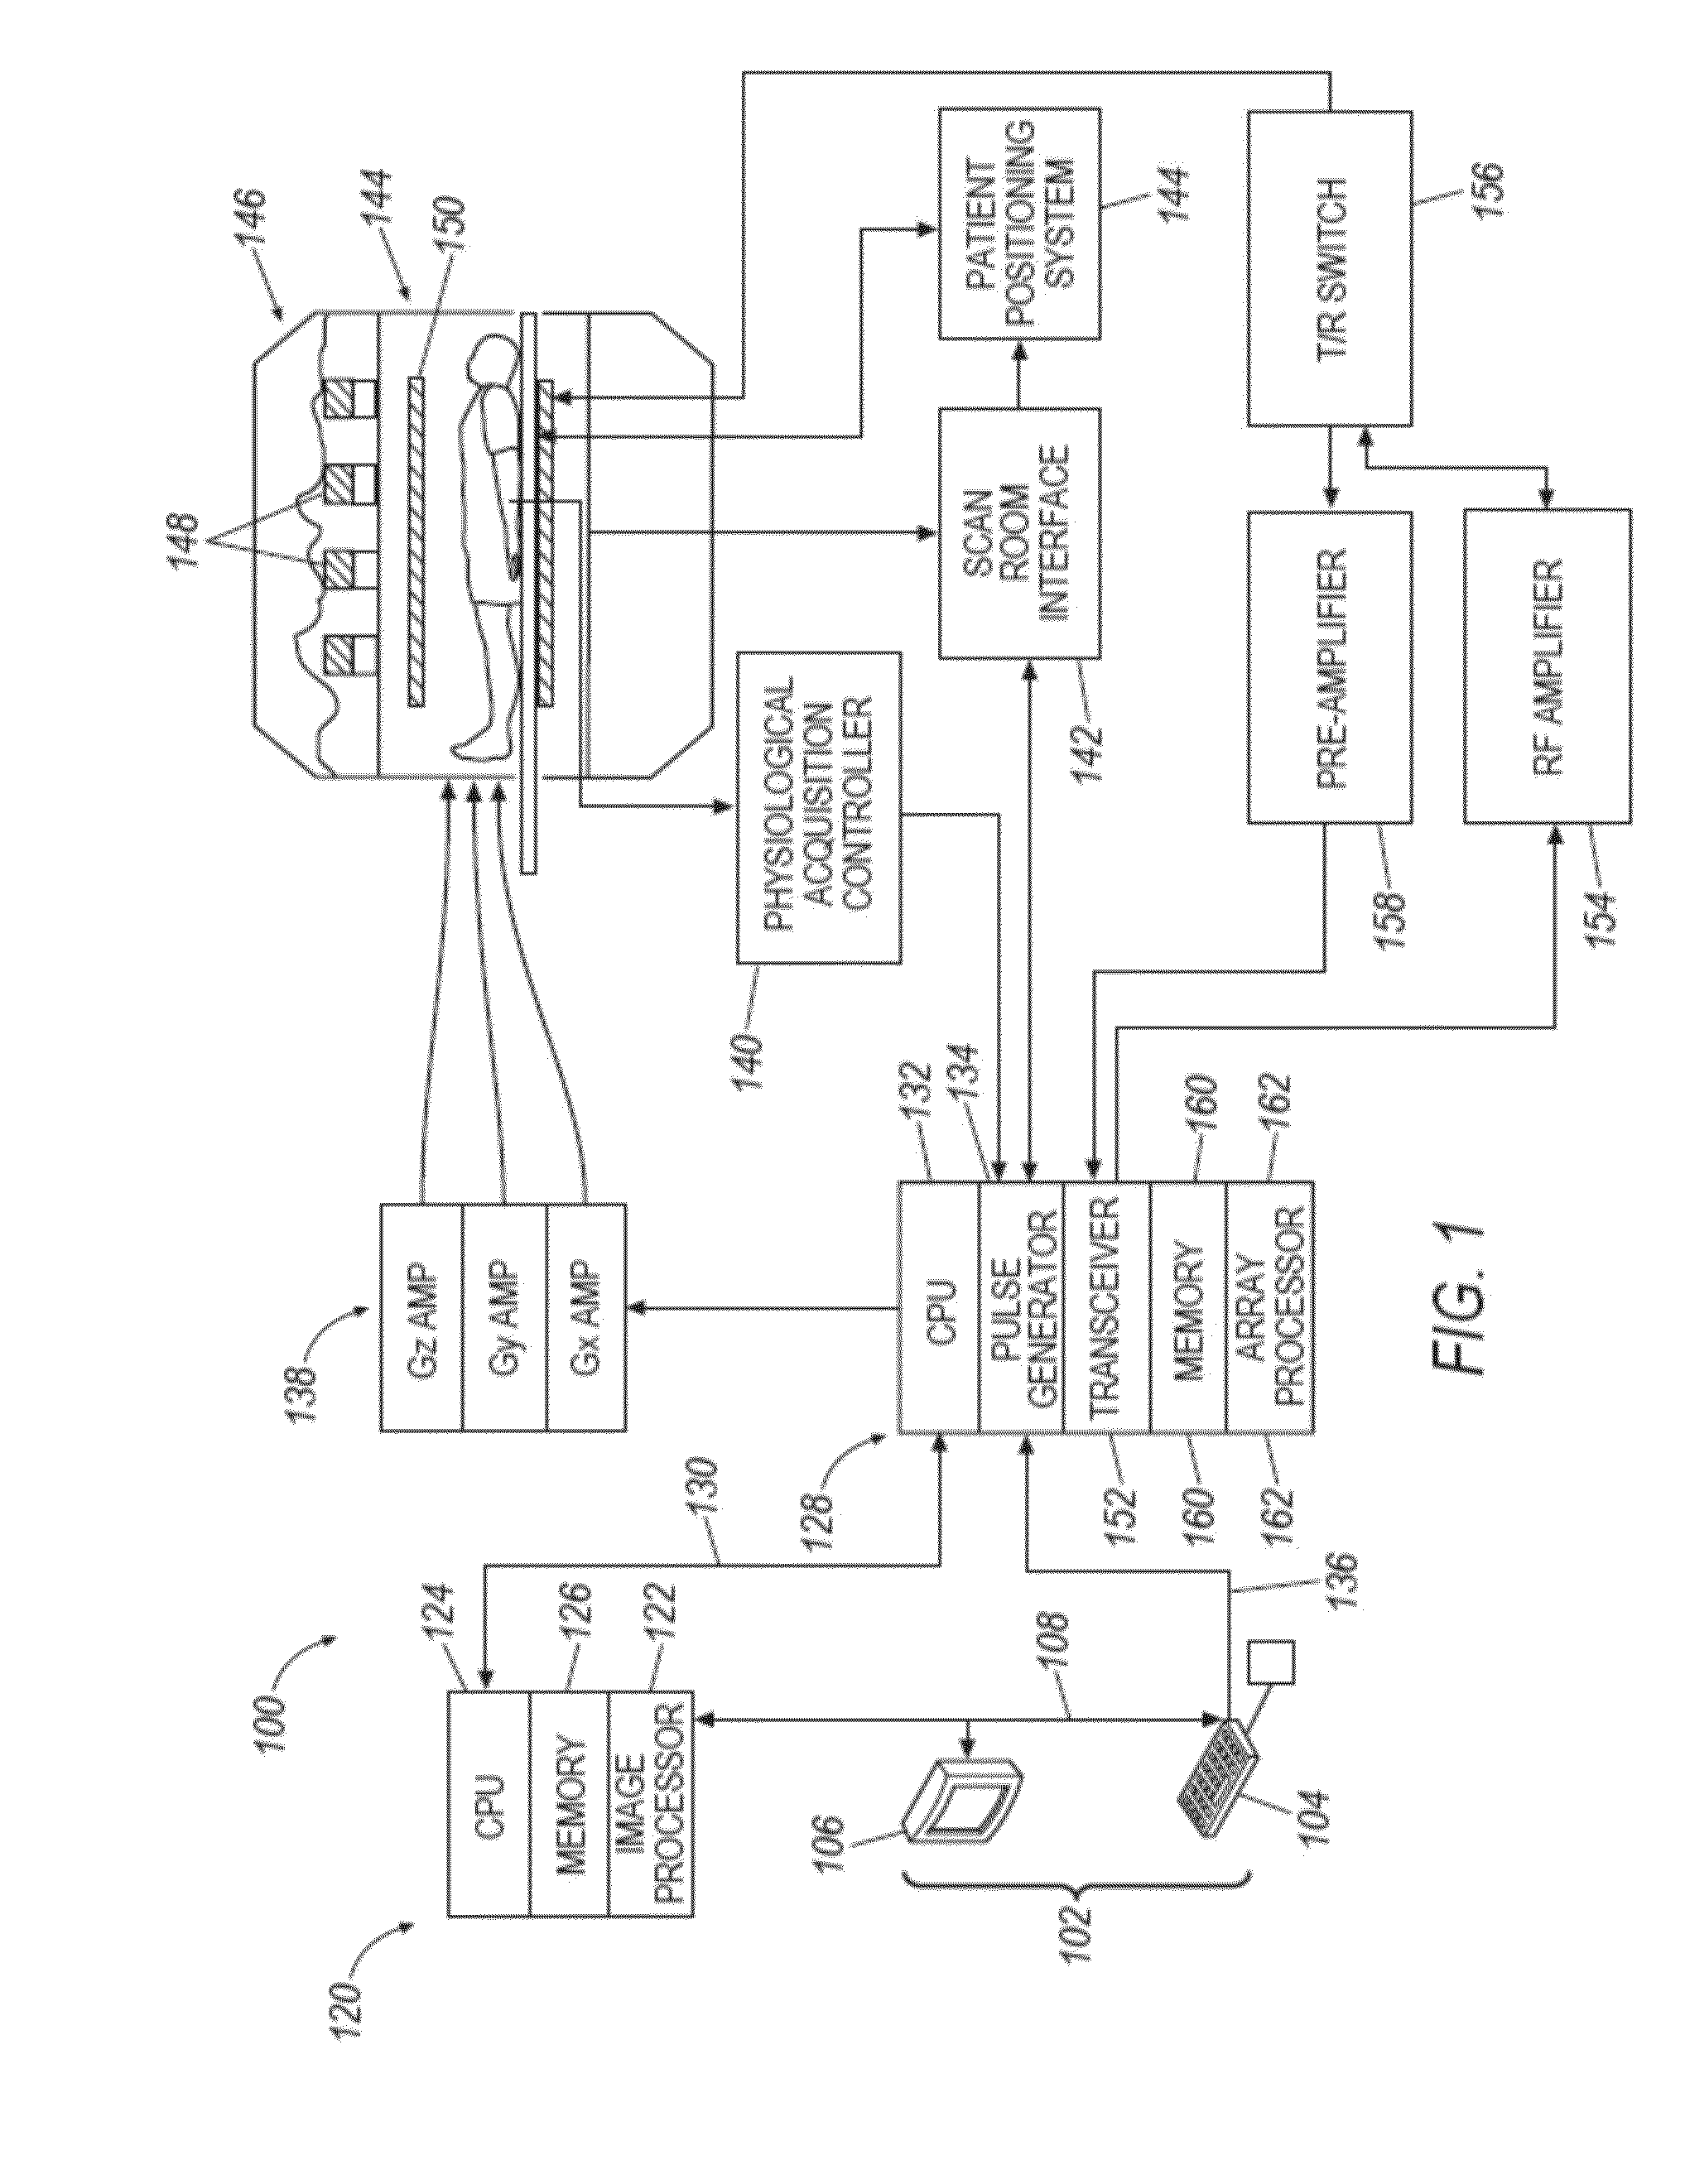 System and method for high-resolution spectroscopic imaging